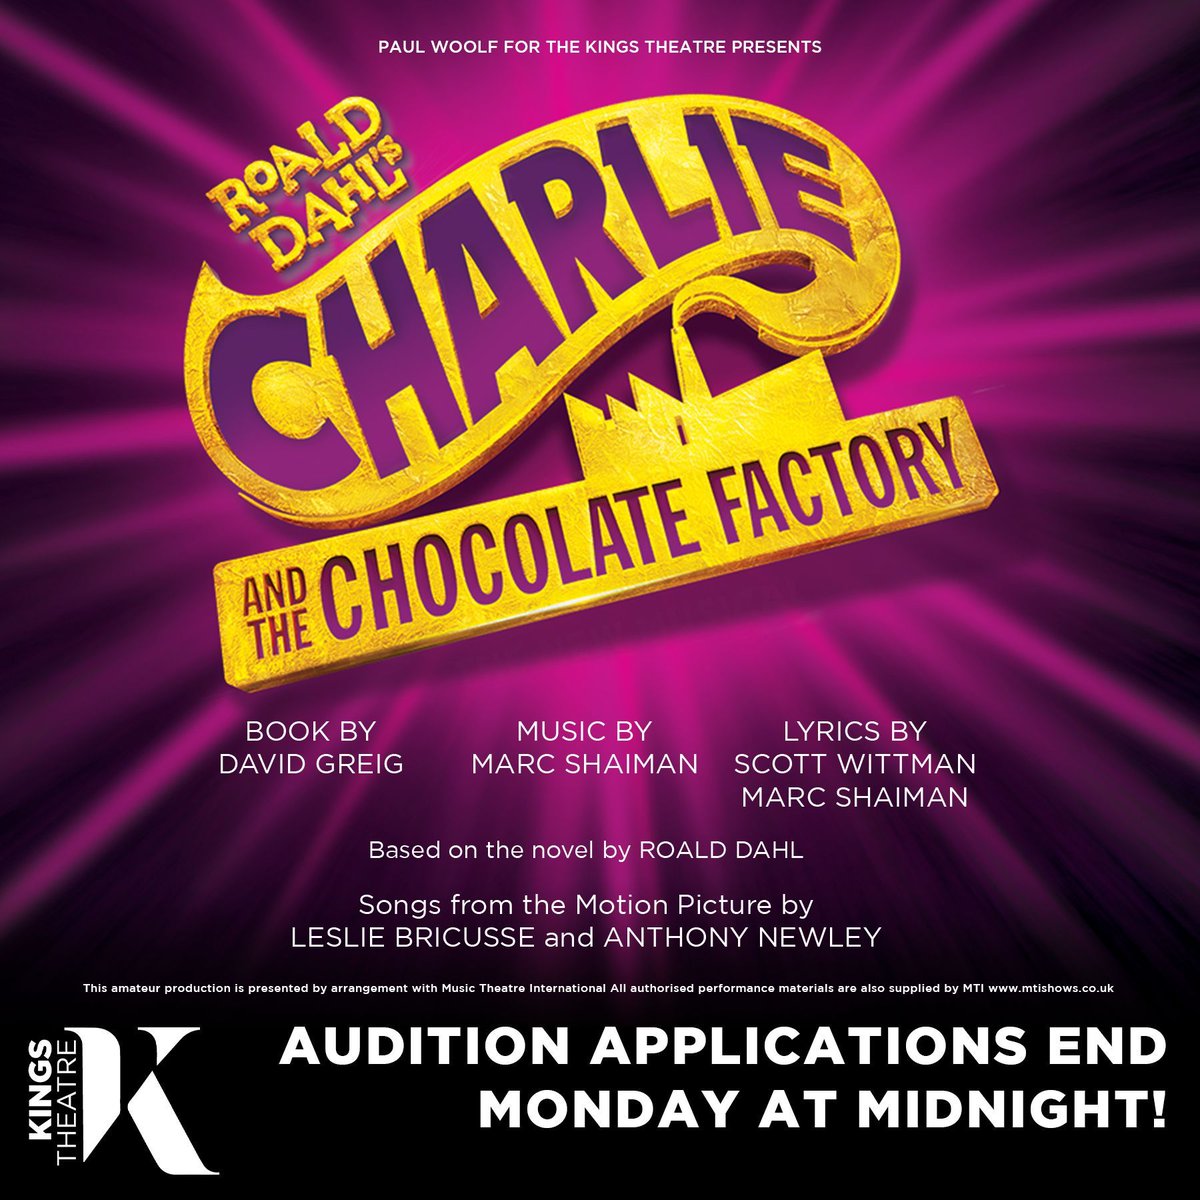 Audition applications are closing on Monday 15th April, Midnight for Charlie and the Chocolate Factory - The Musical here at The Kings Theatre! For Adult and child (9+) applications click here ➡️ buff.ly/4a7eztq 📅 Tue 8 - Sun 13 Oct 🎟️ Tickets ➡️ buff.ly/3vizc72